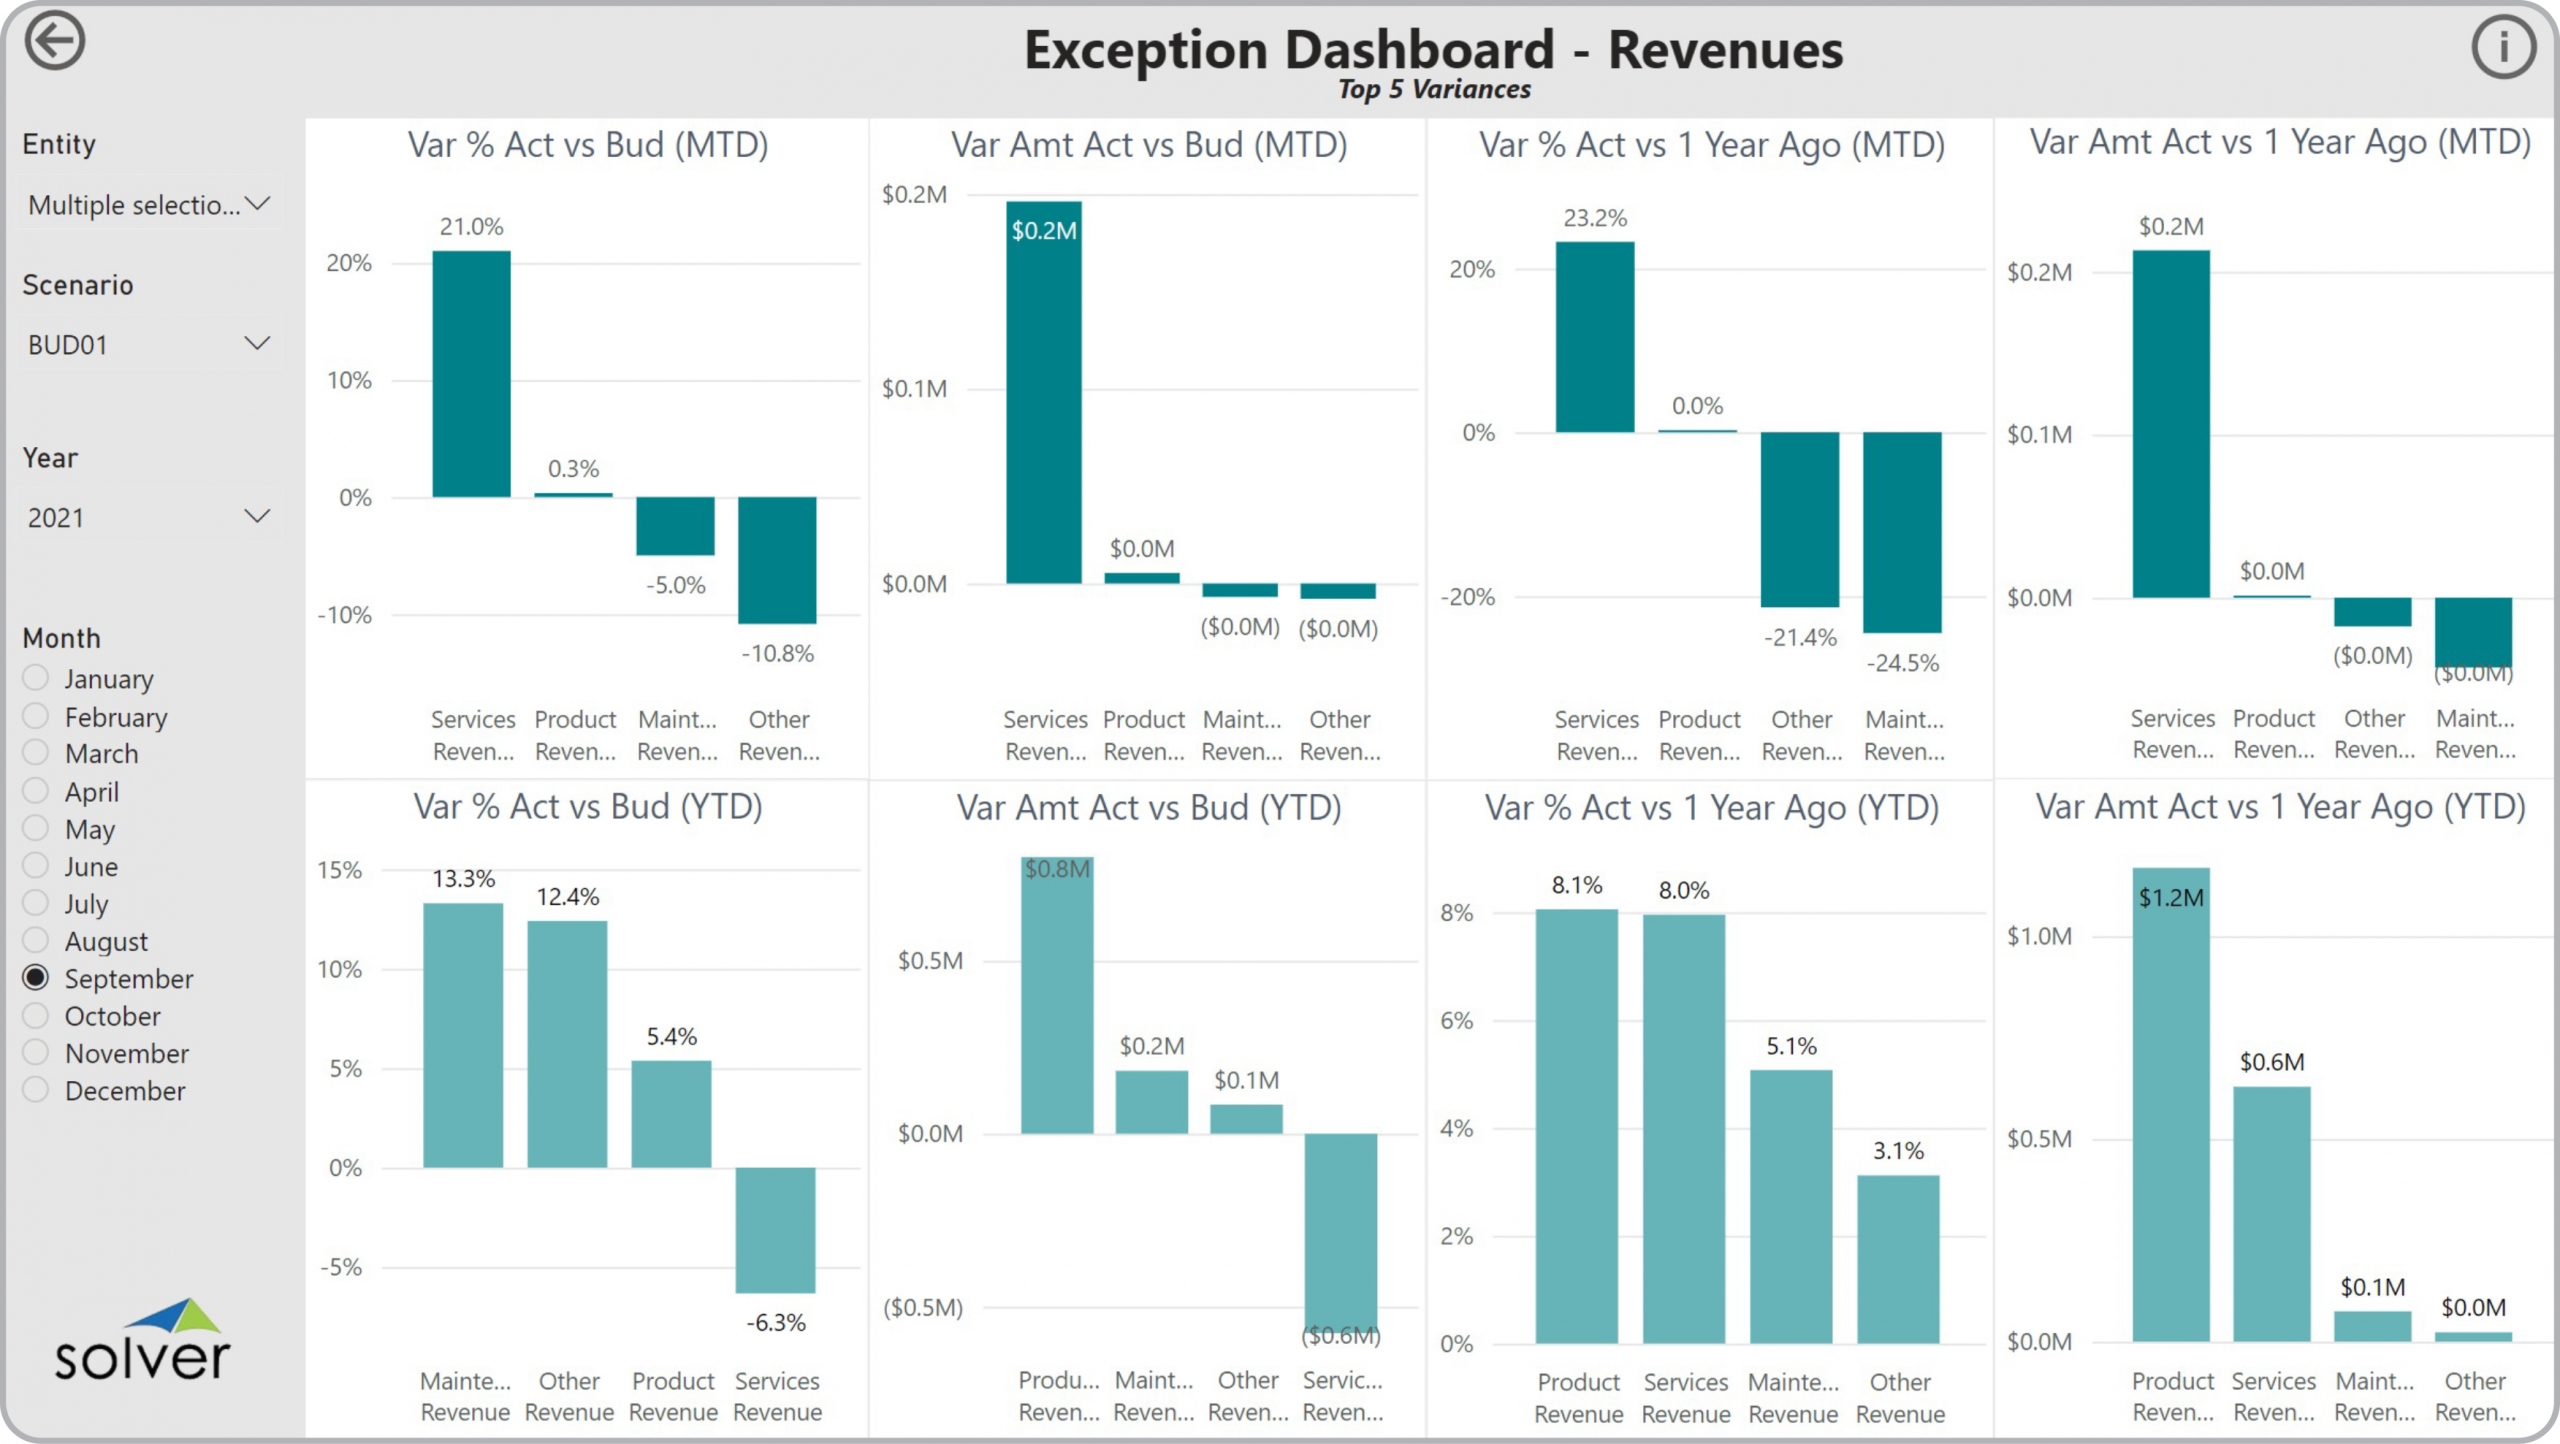 Example of an Revenue Exception Dashboard to Streamline the Monthly Analysis Process